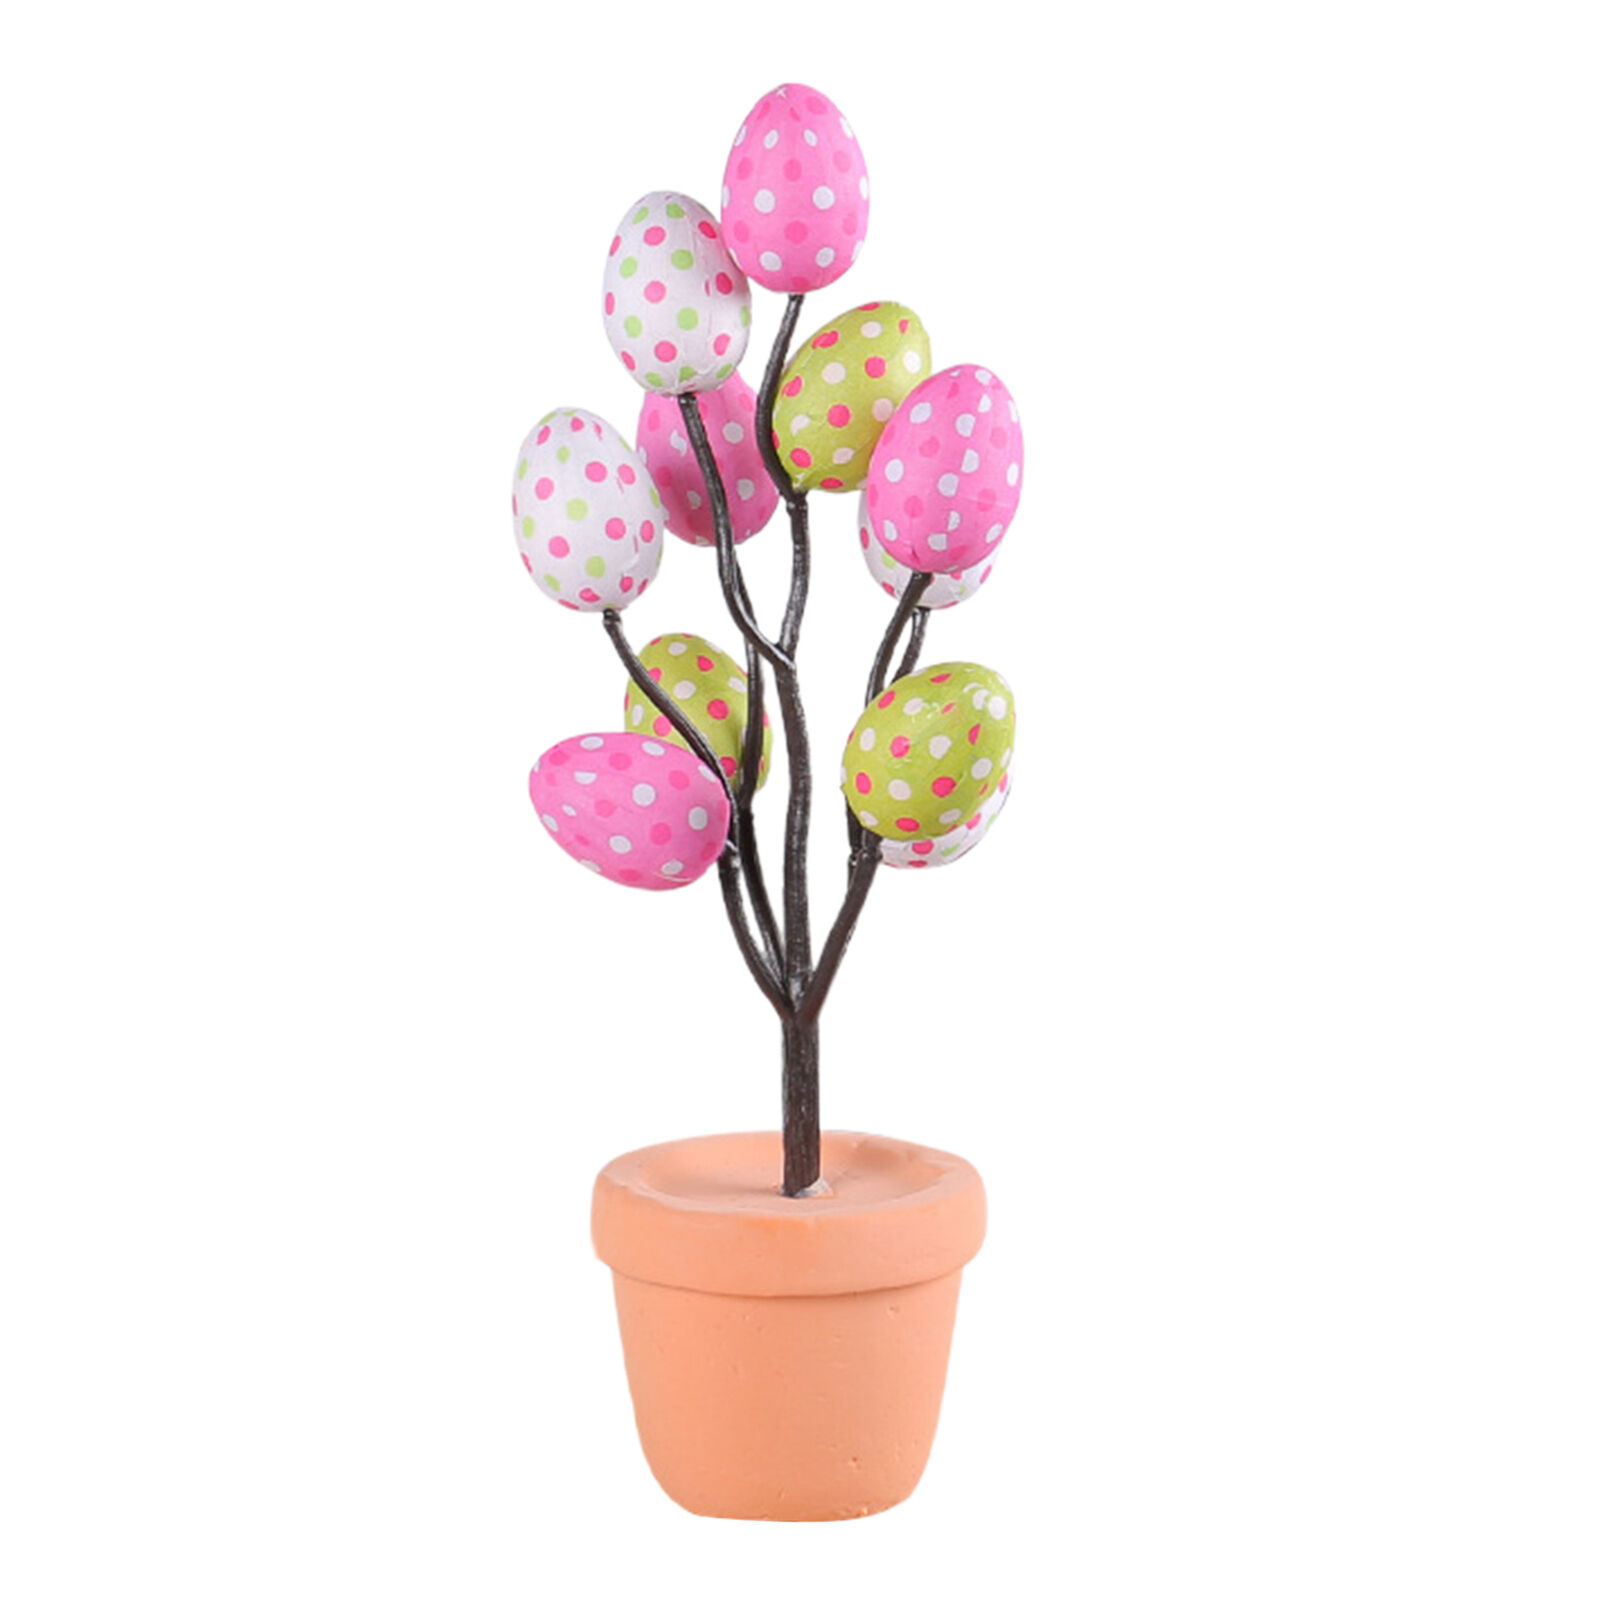 Easter Egg Tree Tabletop Decor Cartoon Ornament for Holiday Cute Home Decoration